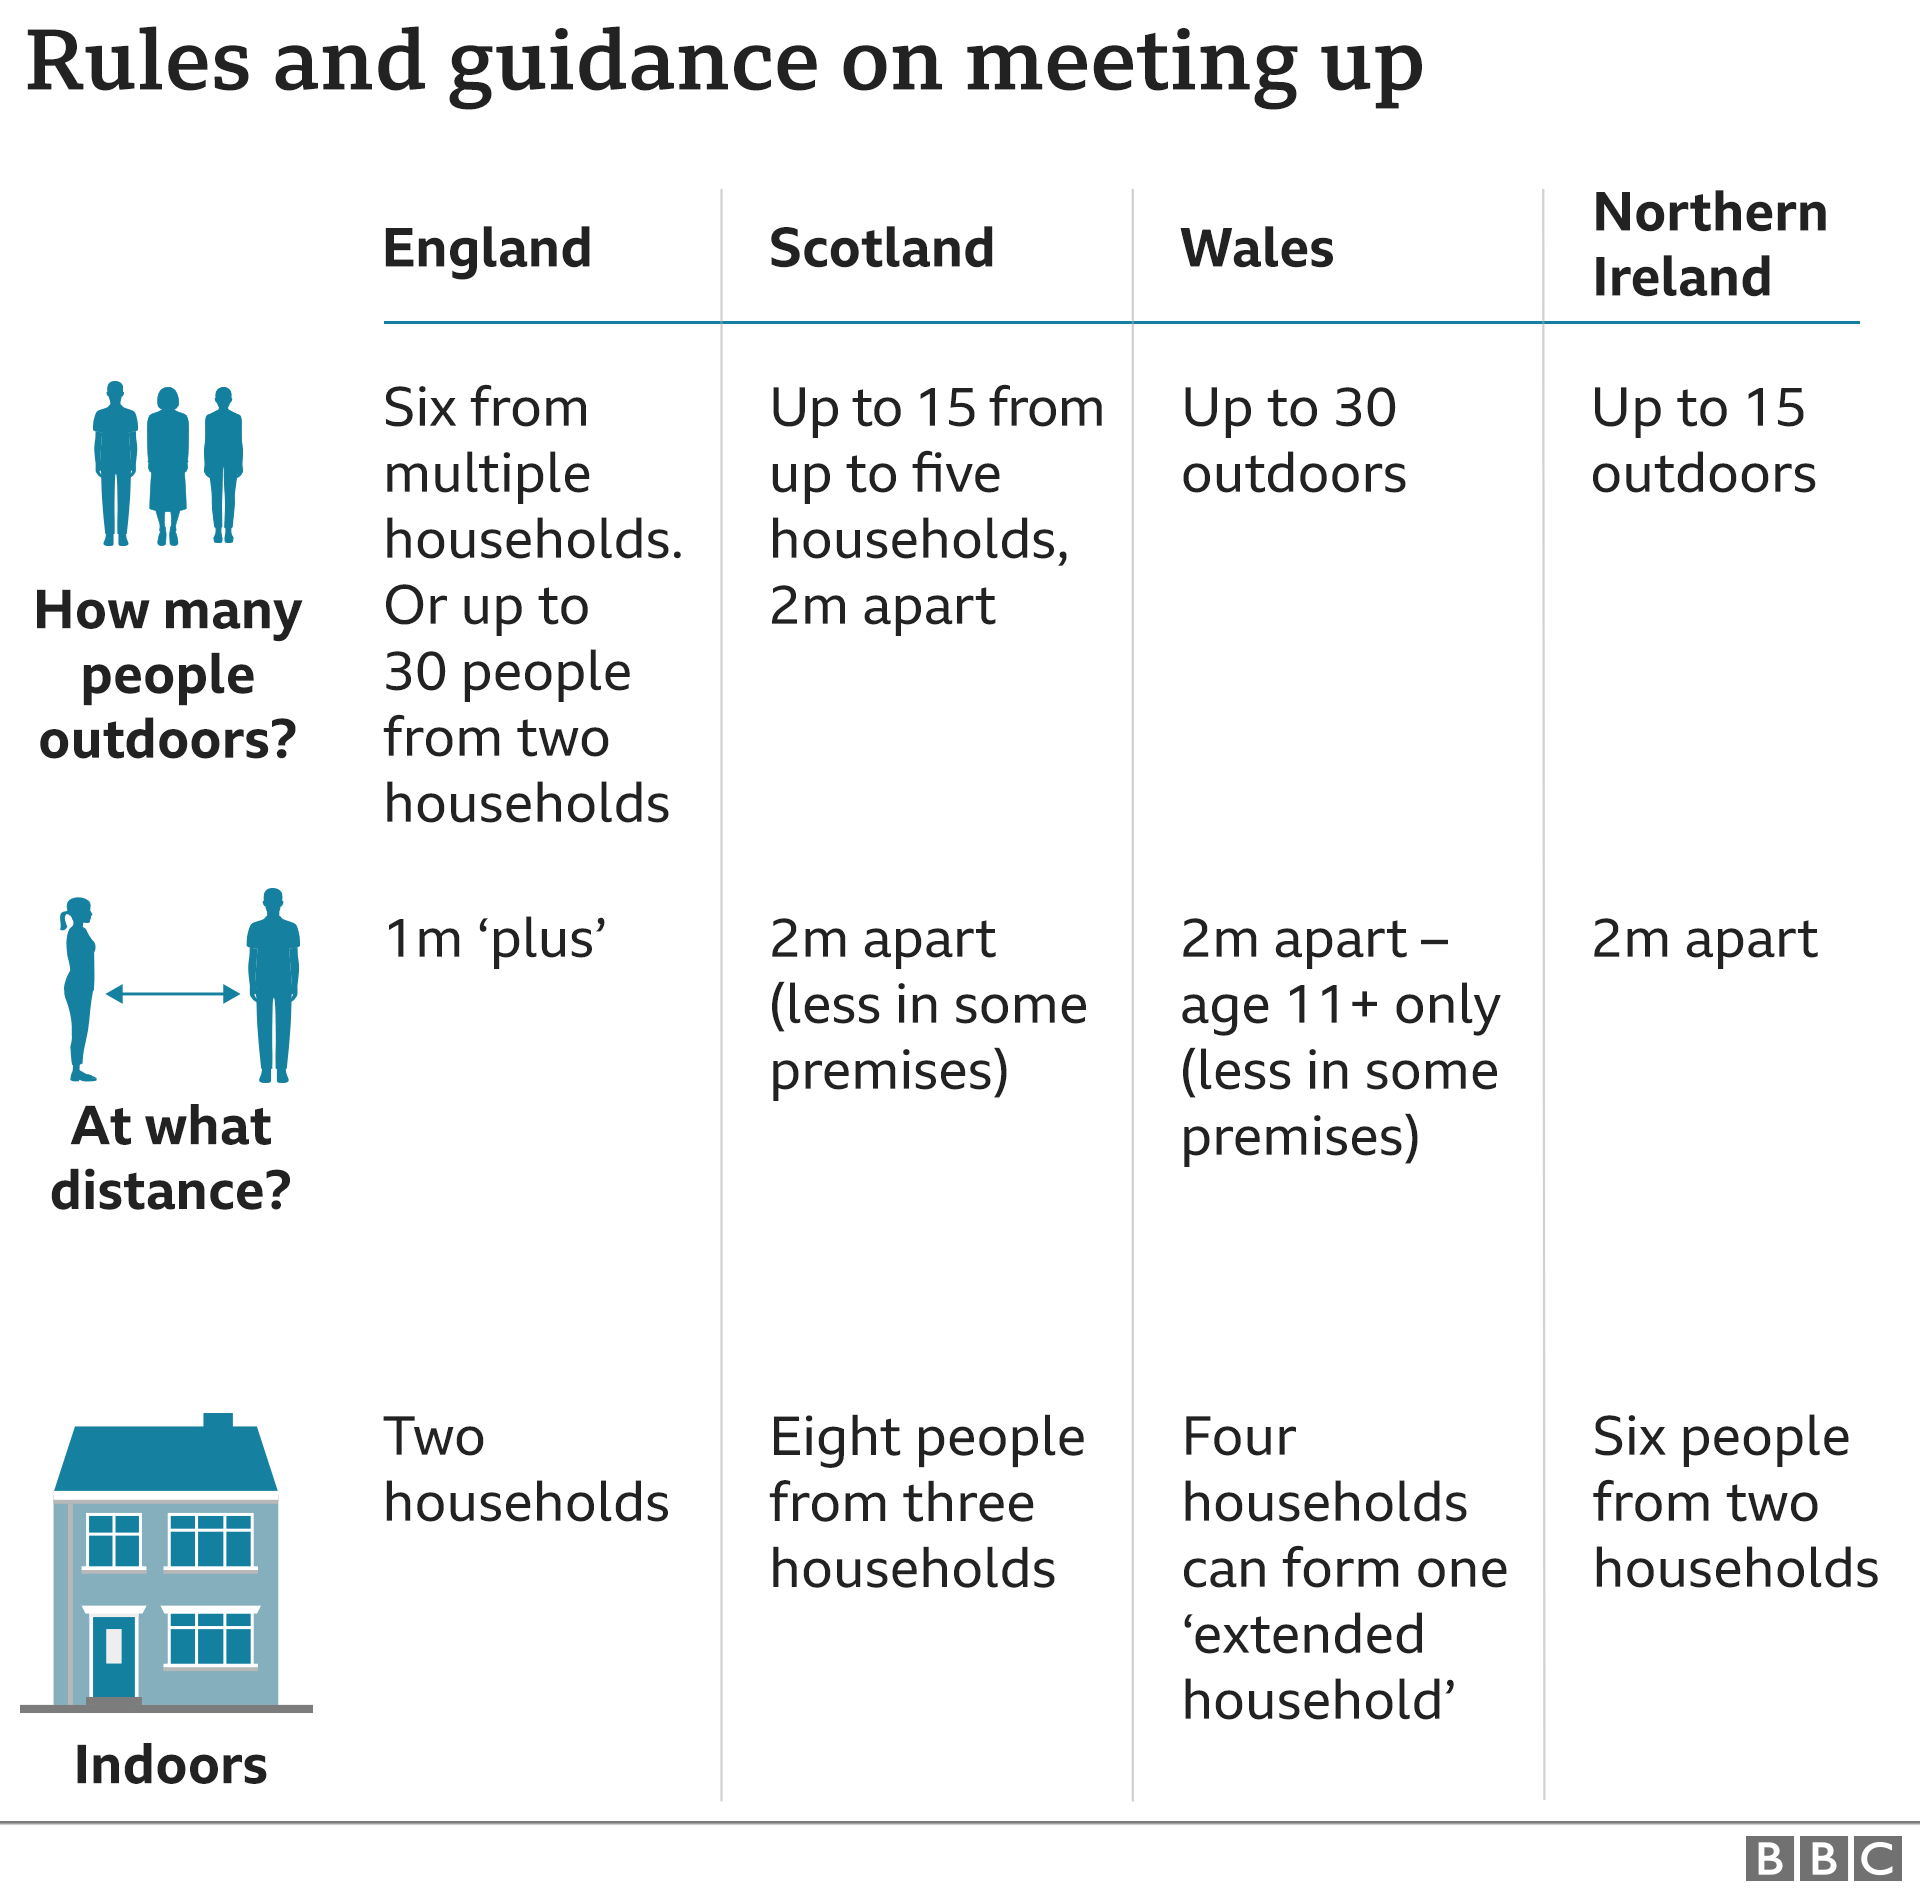 Rules and guidance meeting up - 7 Sept